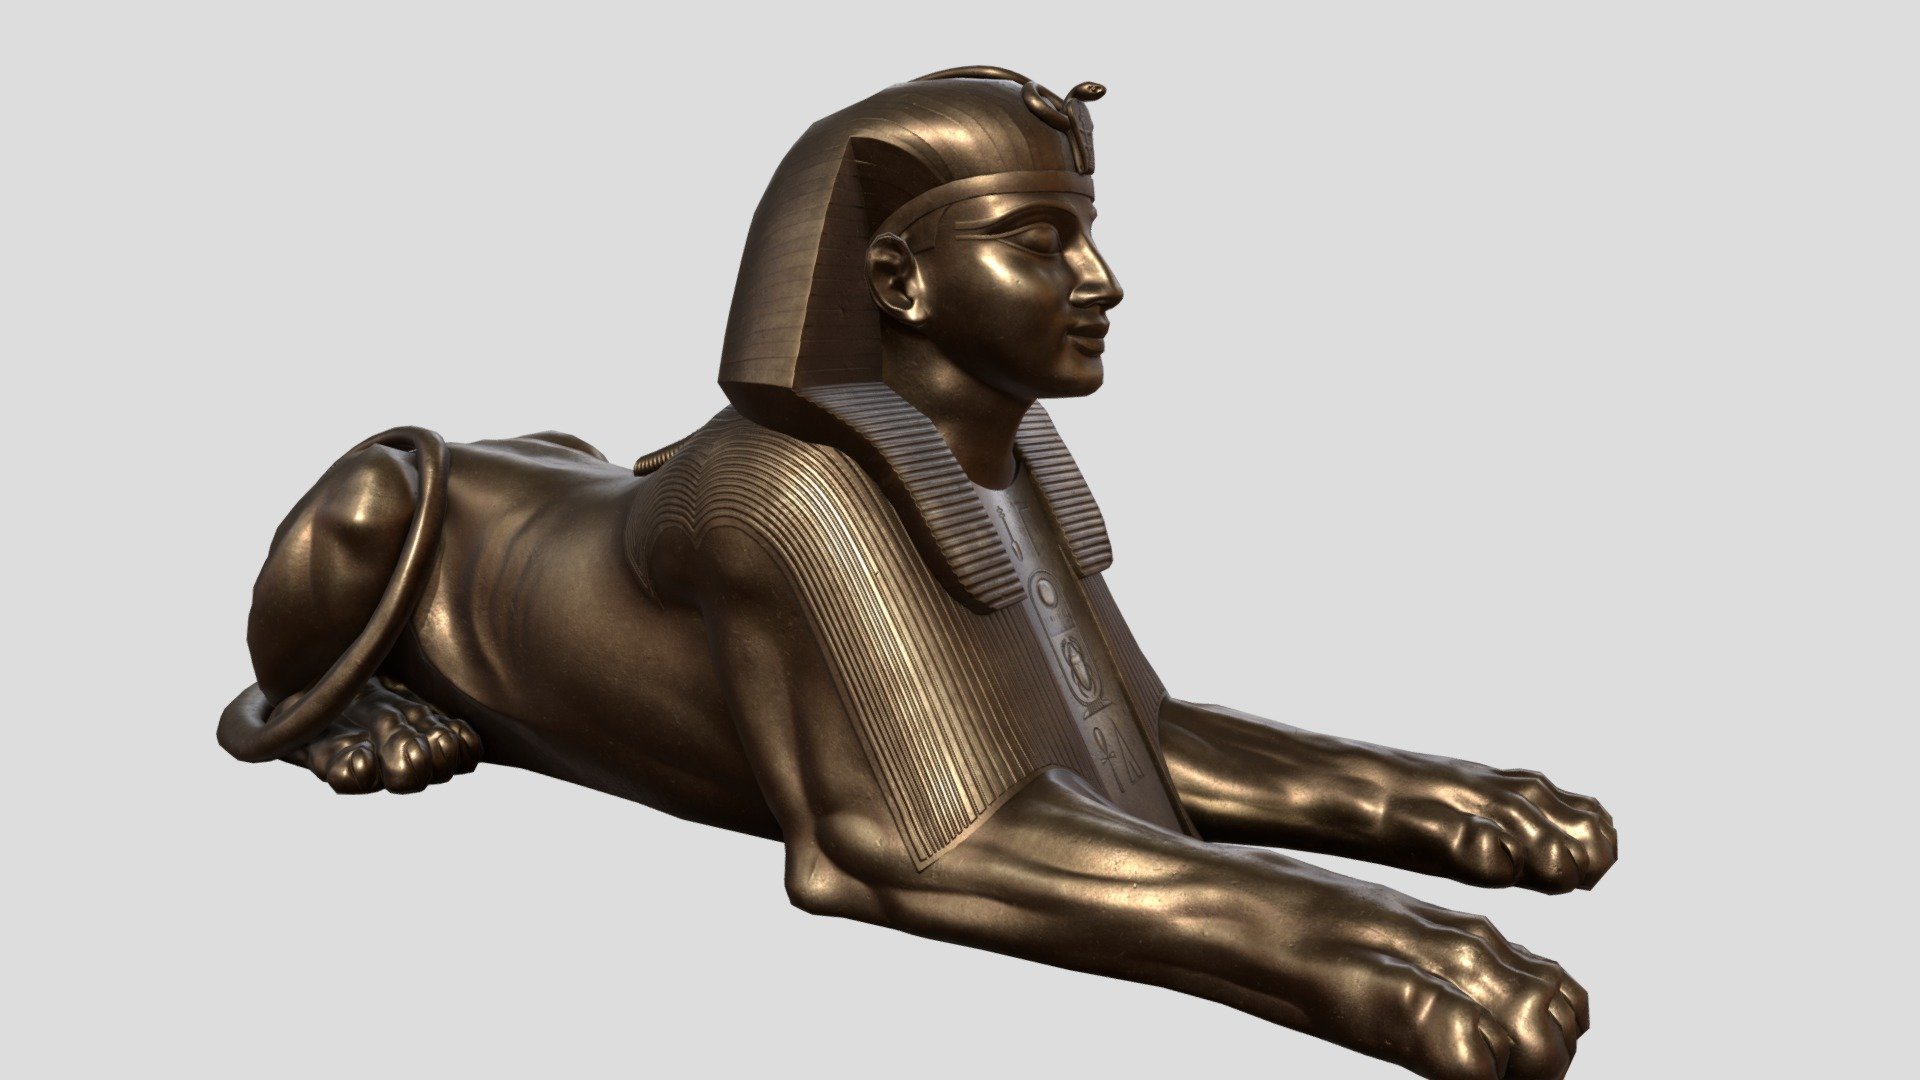 3D model of the Sphinx at the Cleopatra Needle in London 3d model